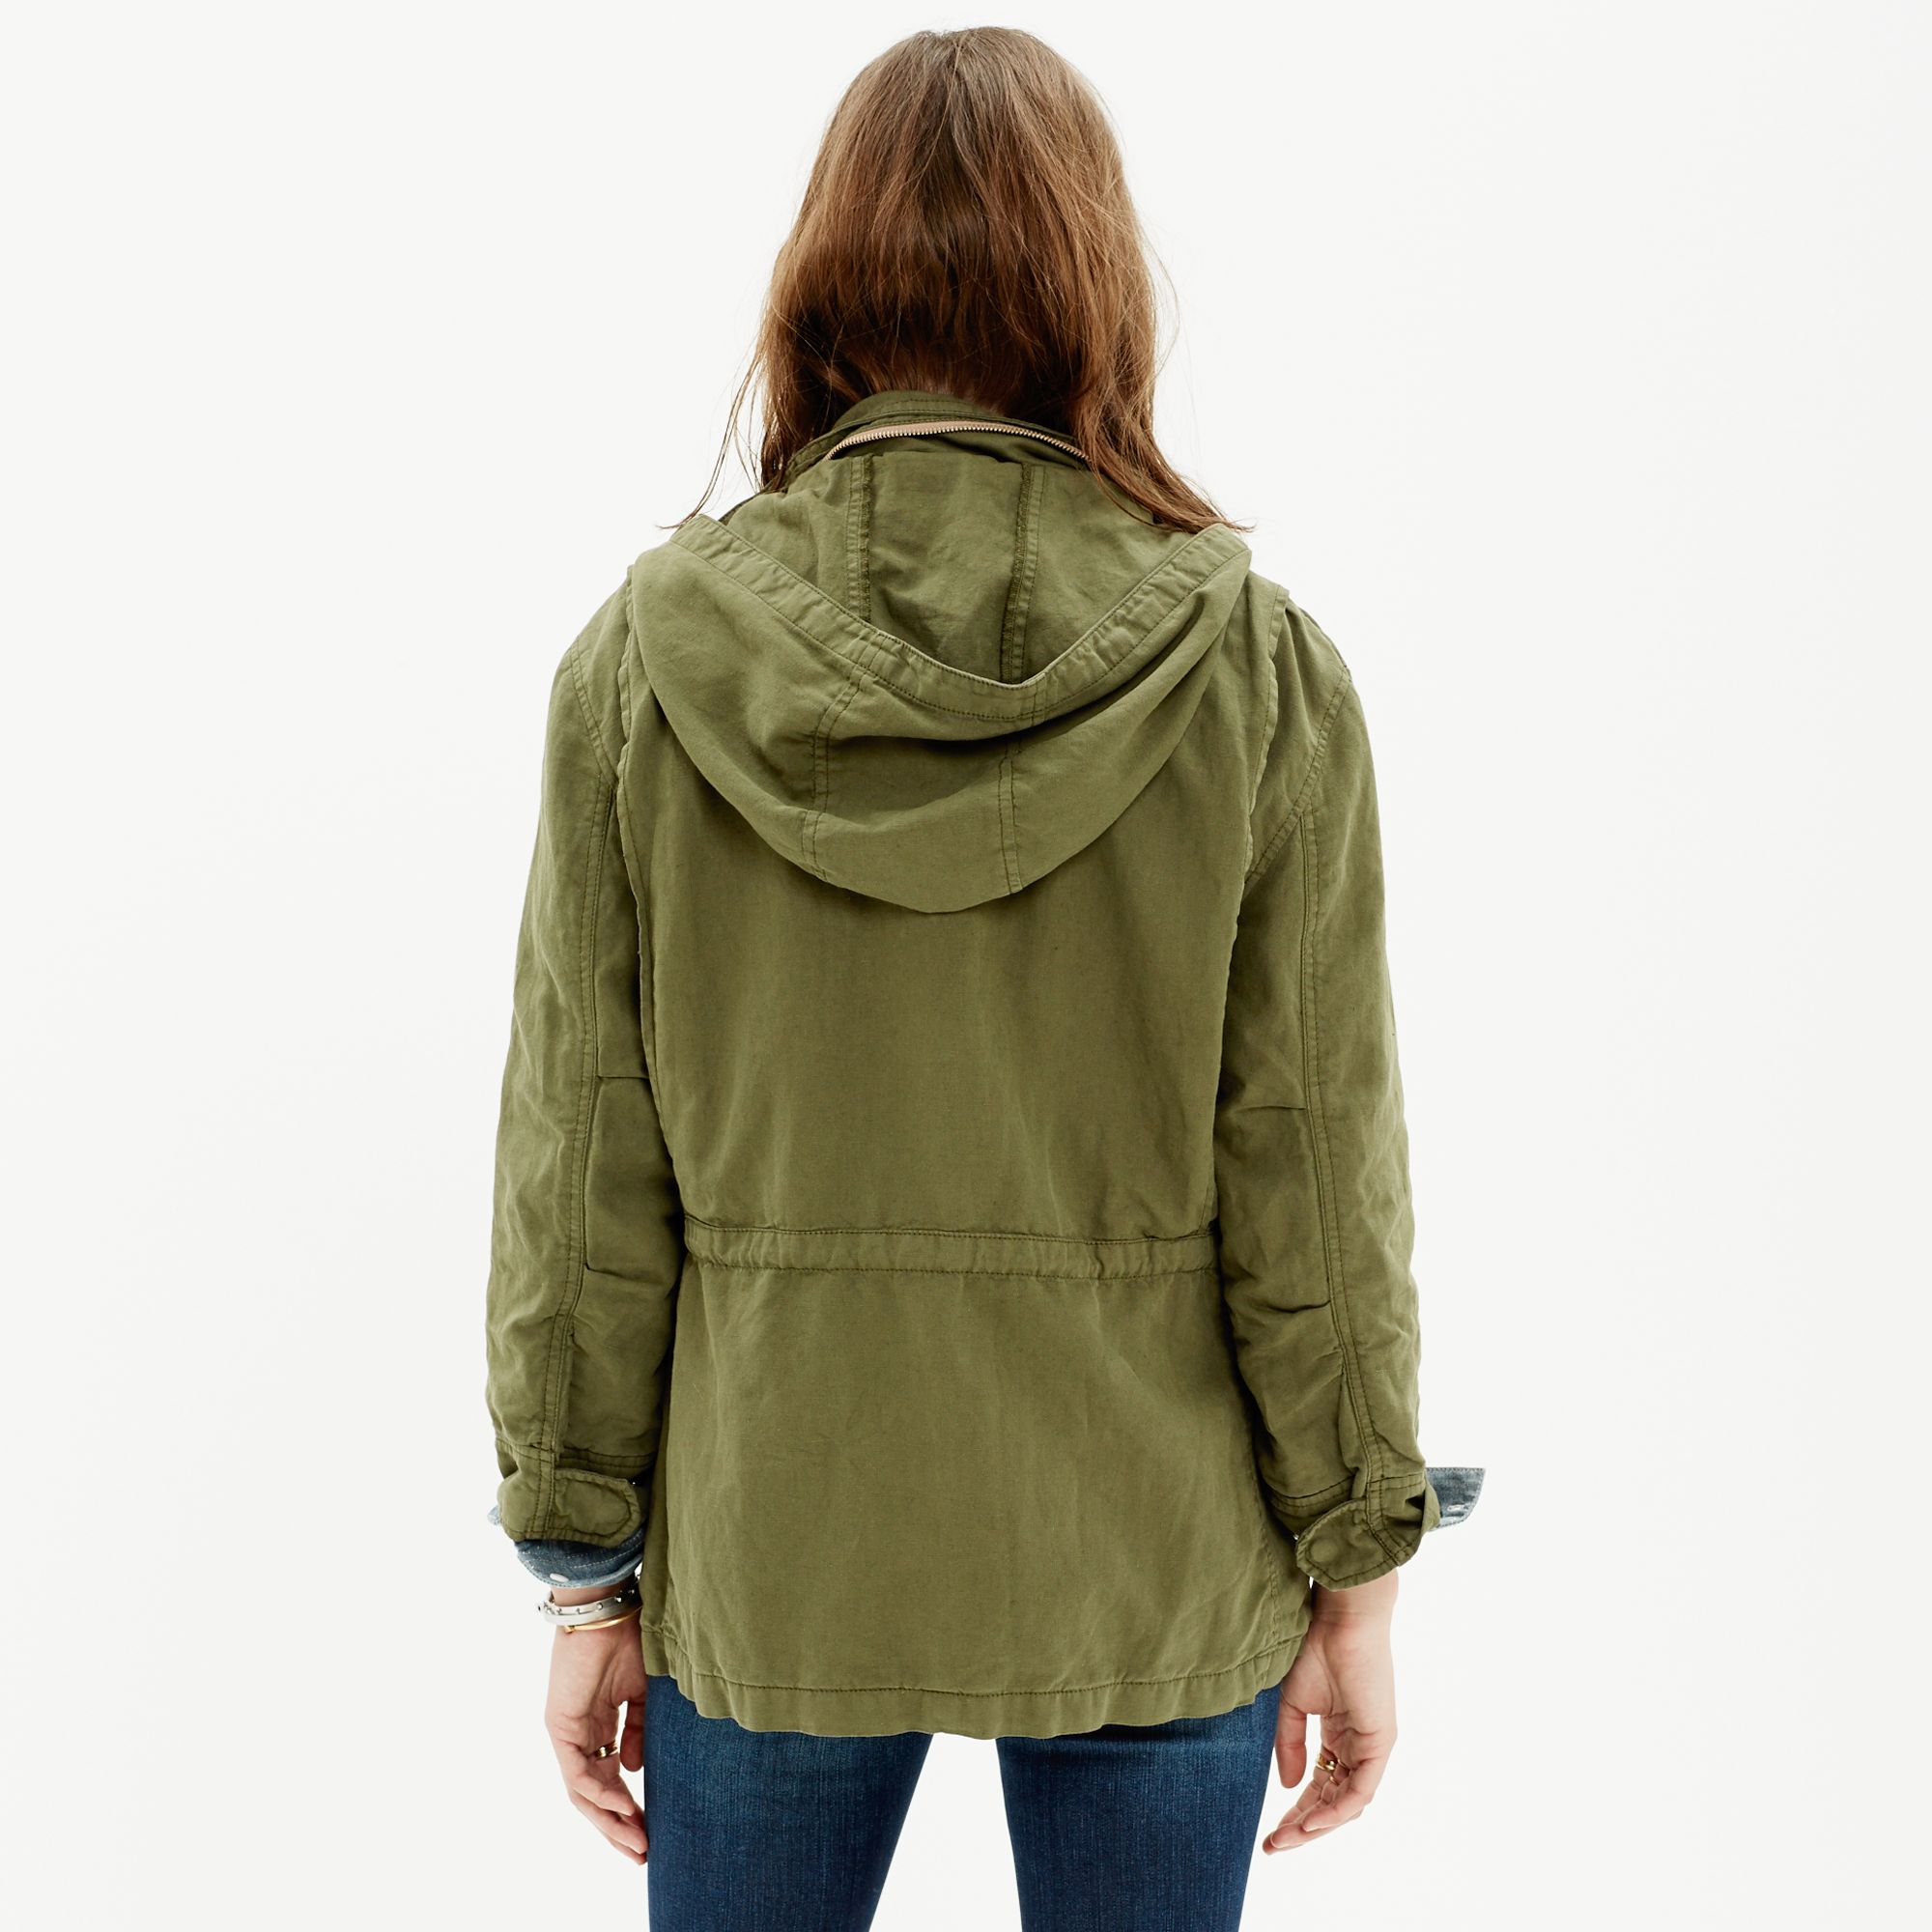 Madewell Military Anorak in Green - Lyst